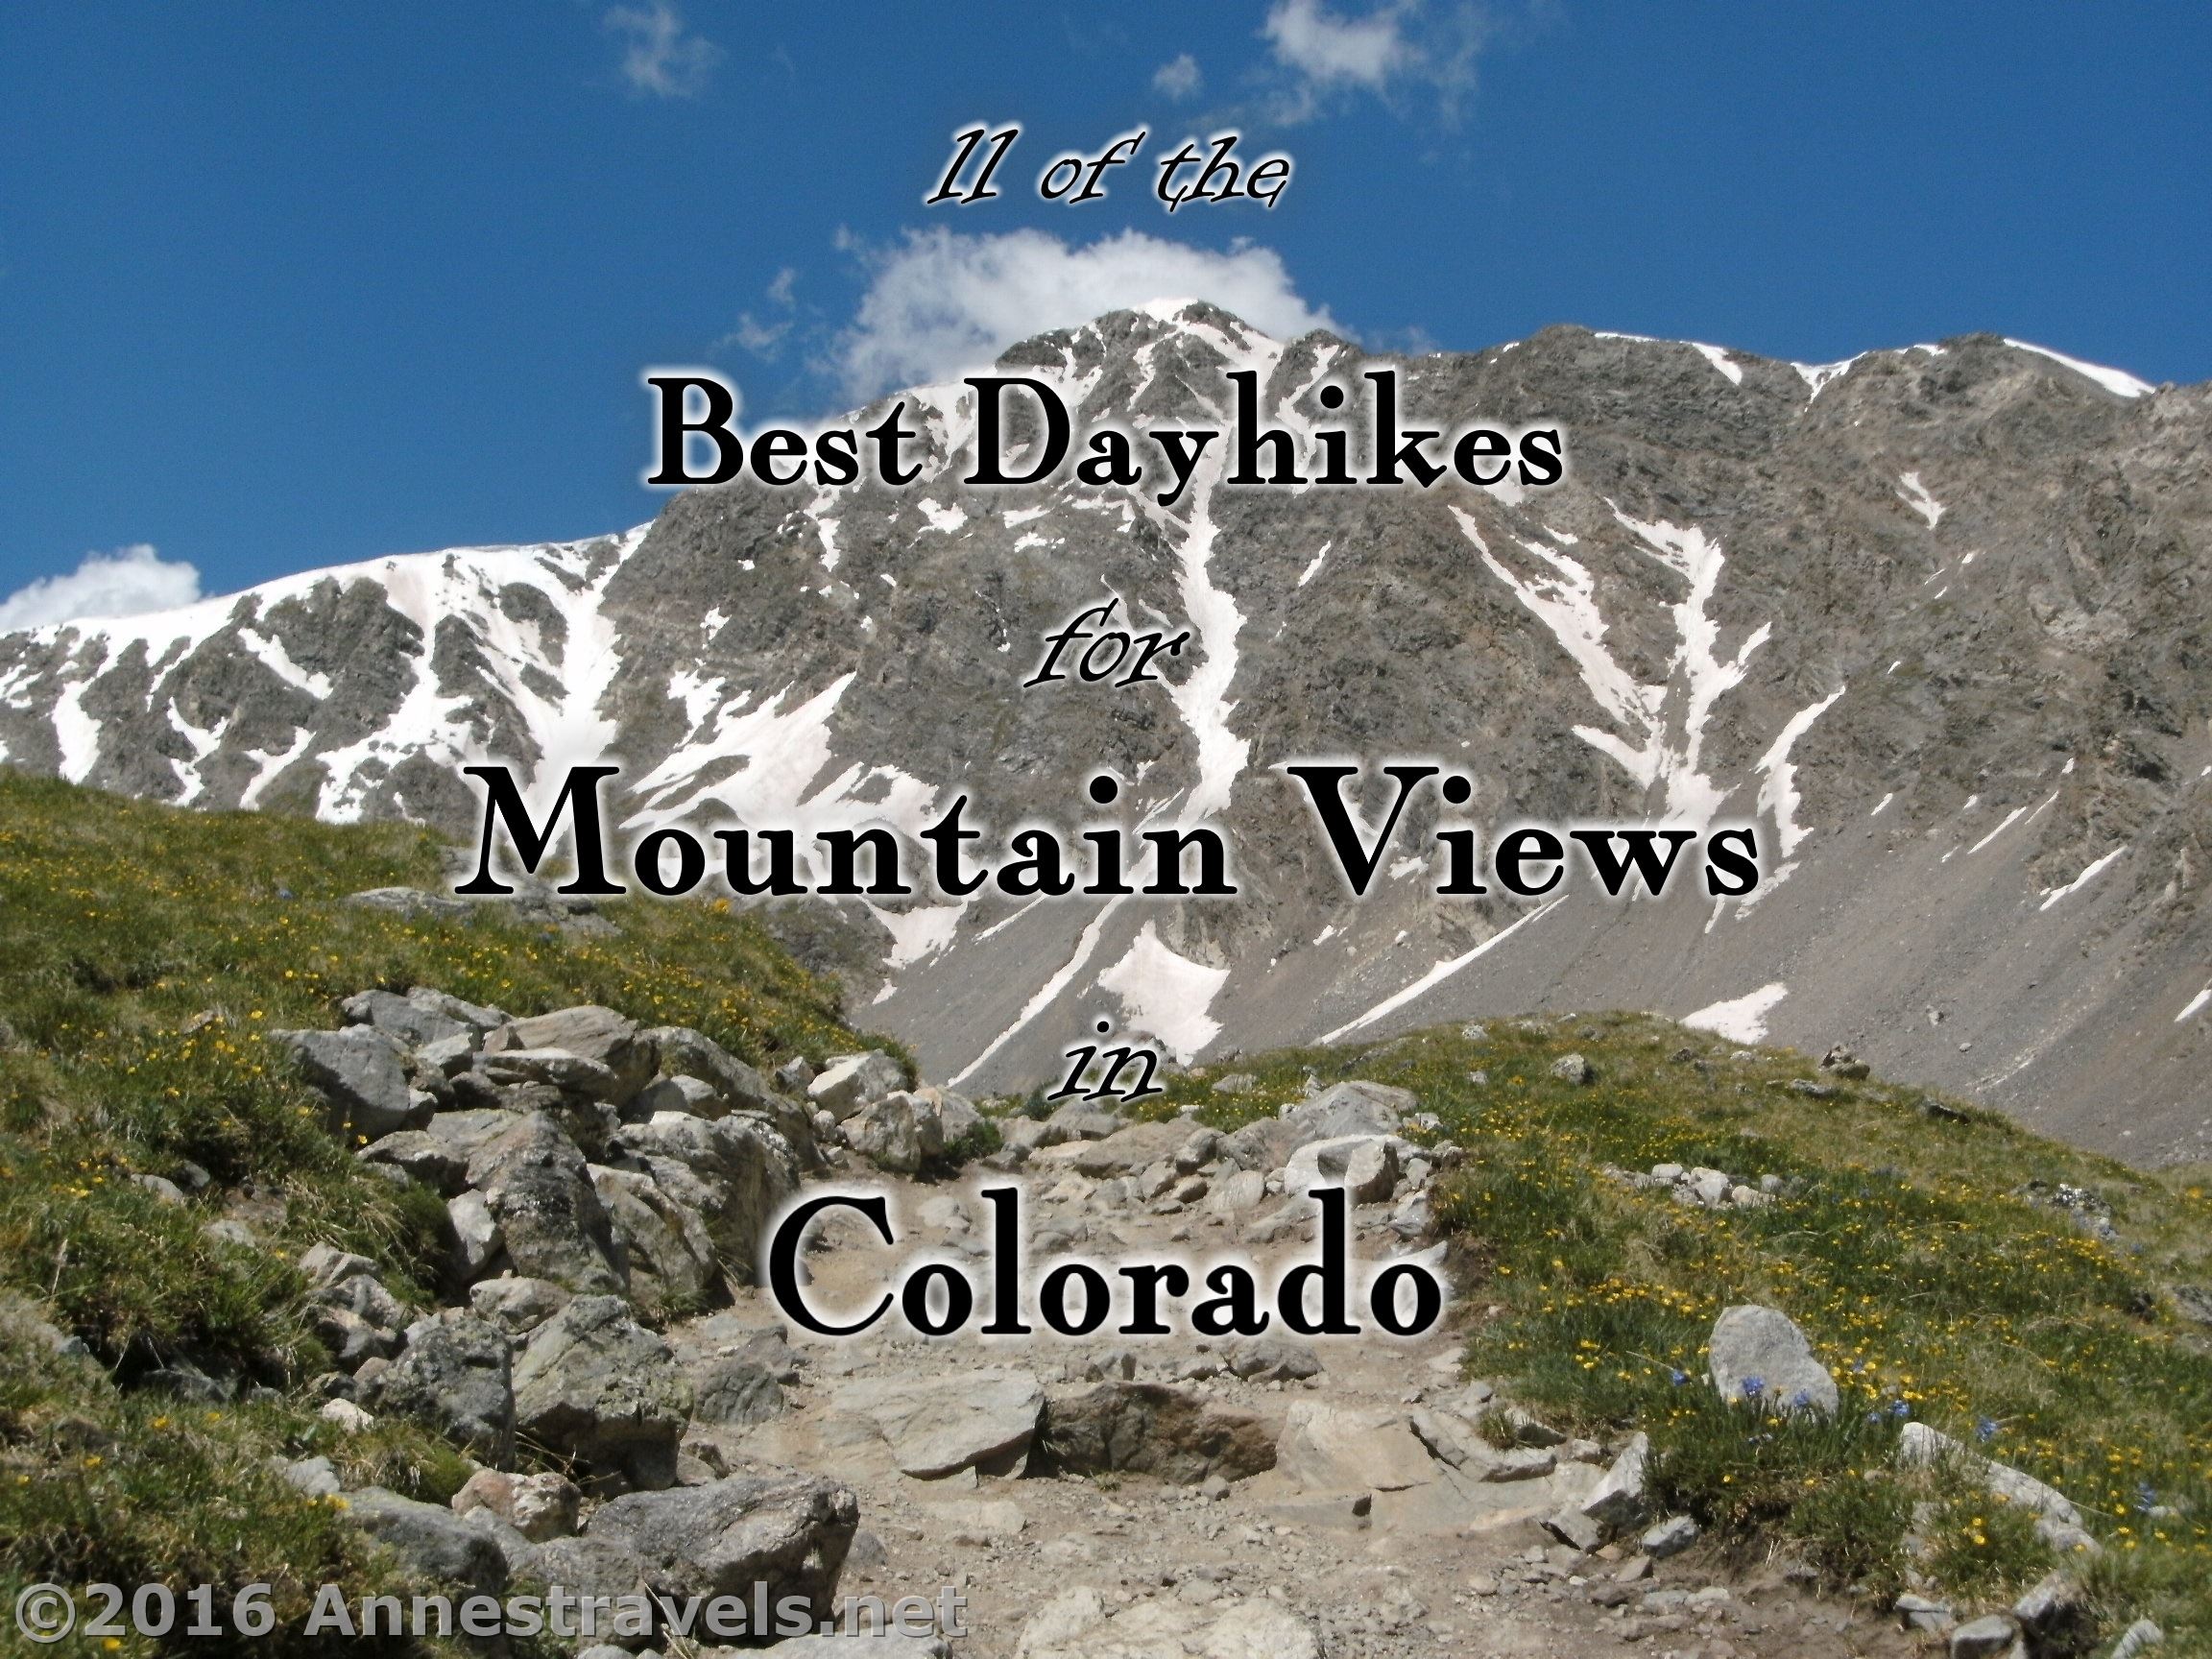 11 of the Best Dayhikes for Mountain Views of Colorado - Anne's Travels